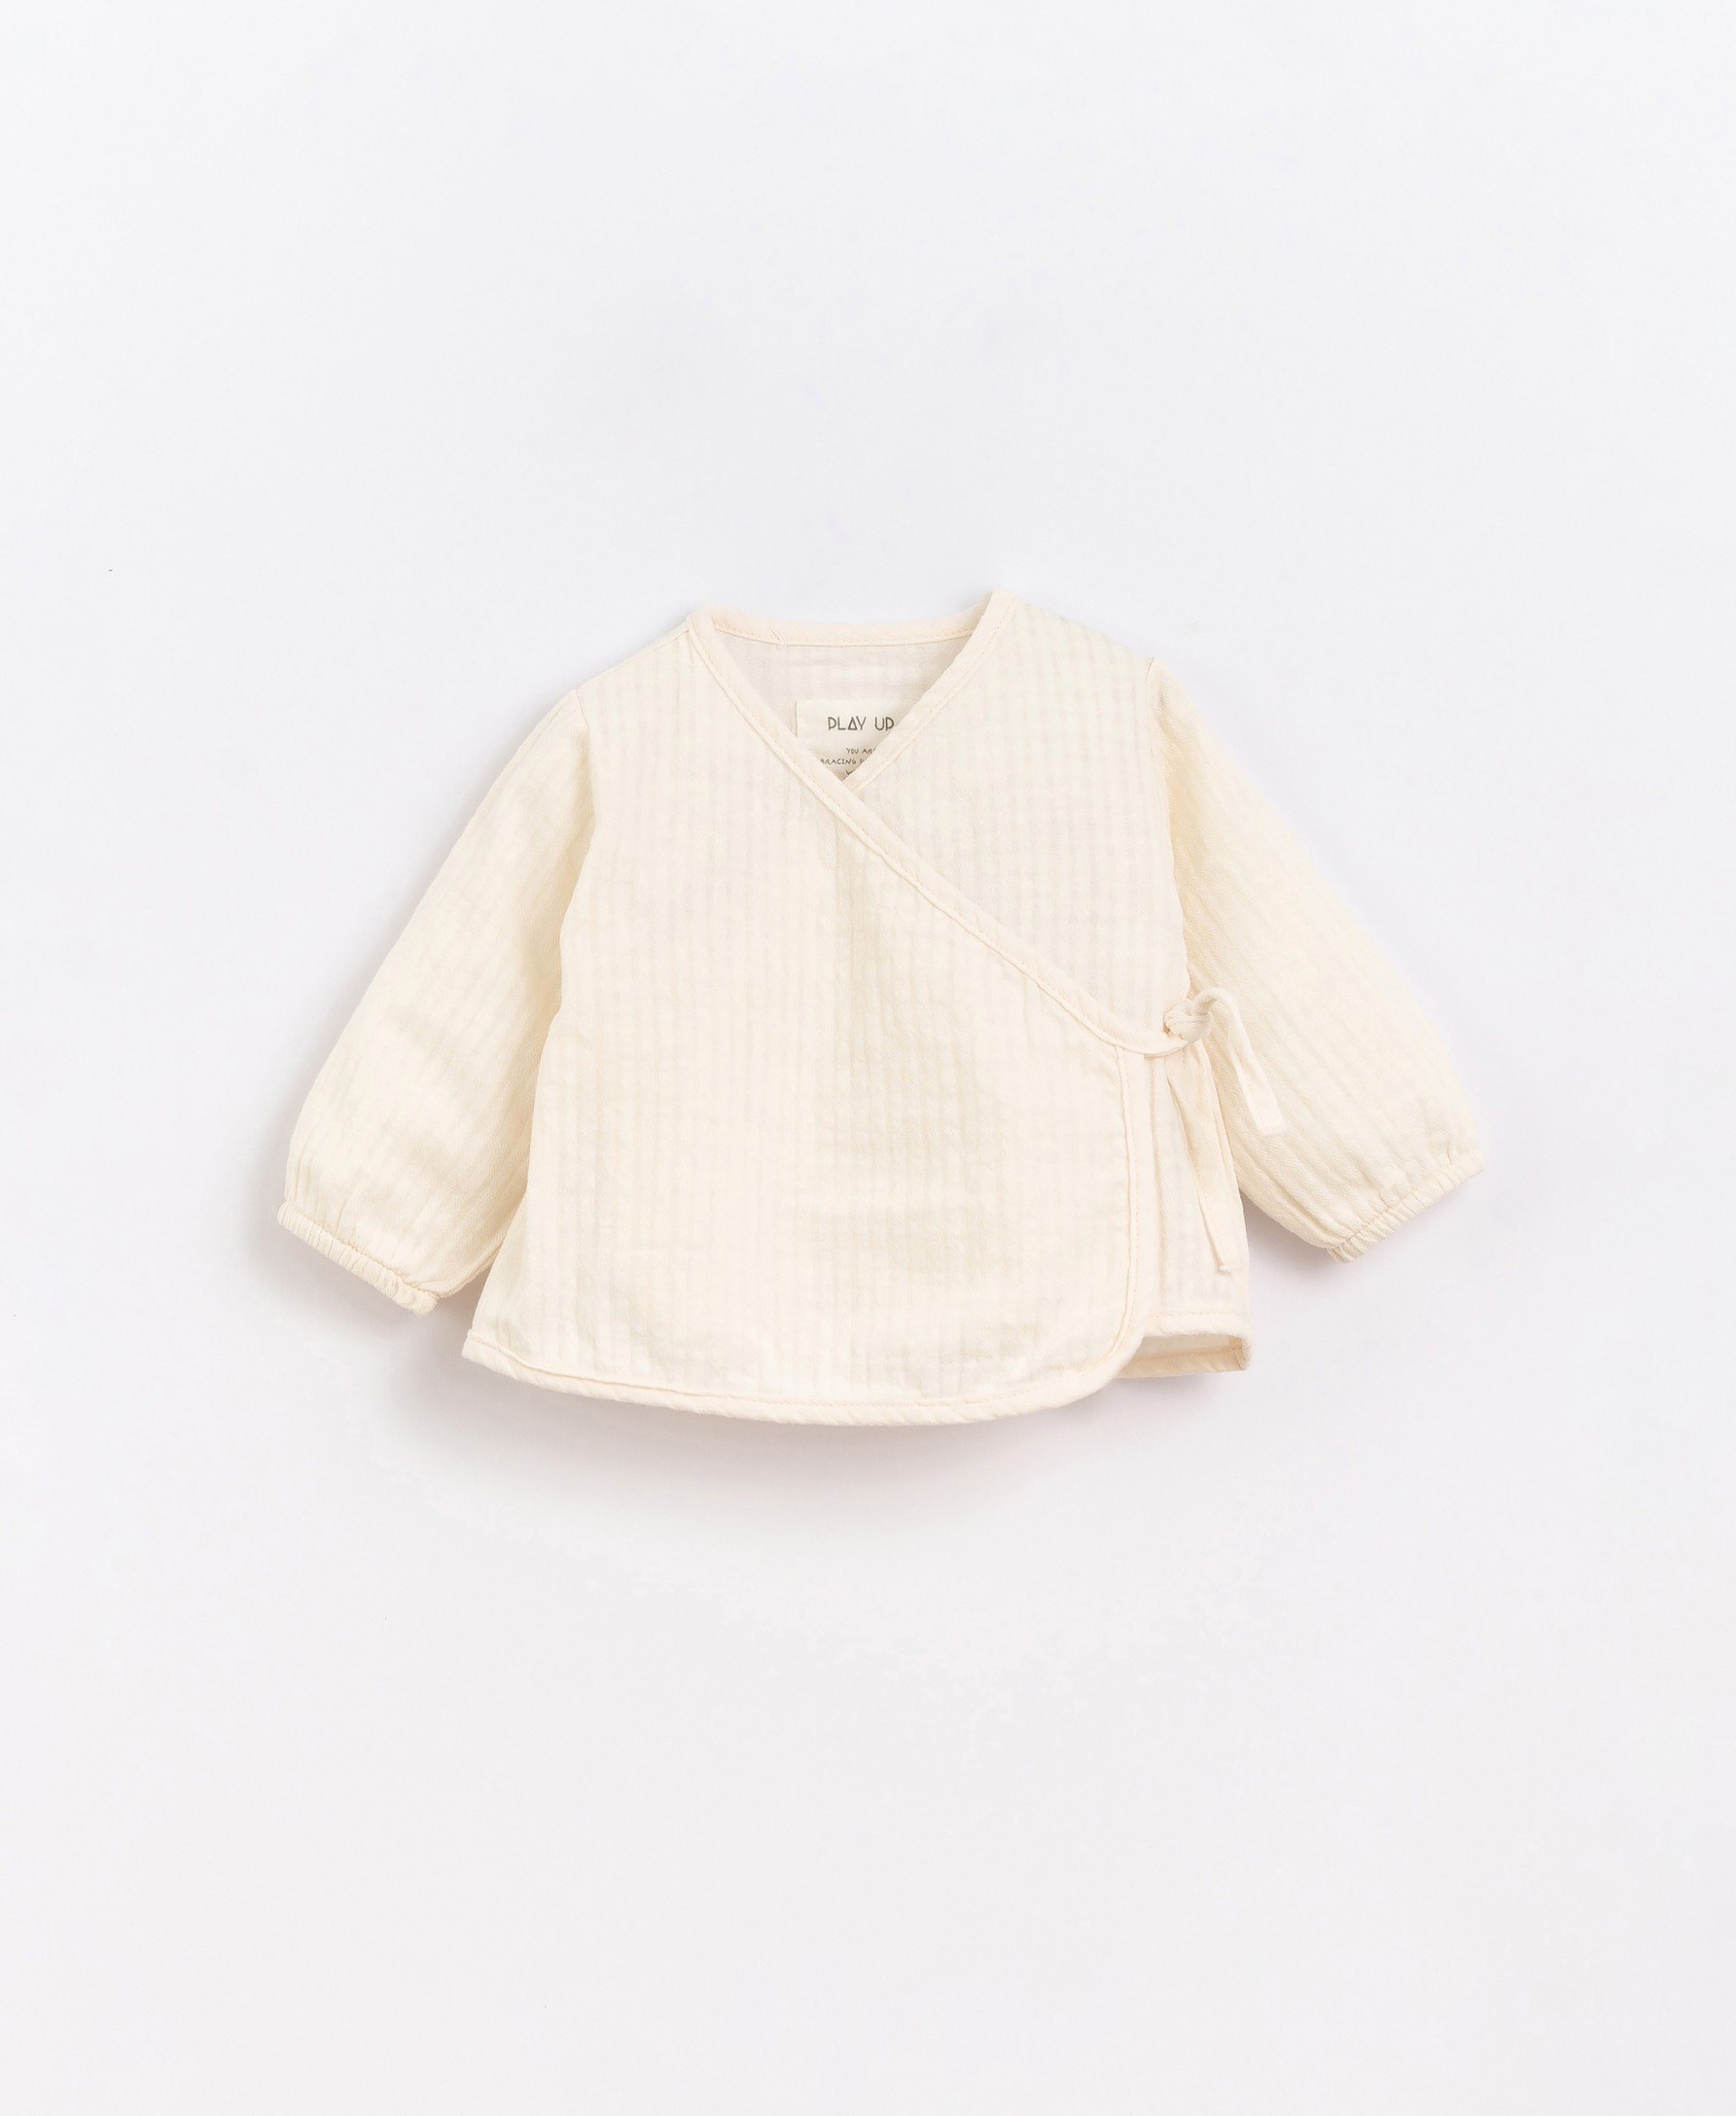 Shirt in cotton fabric | Basketry